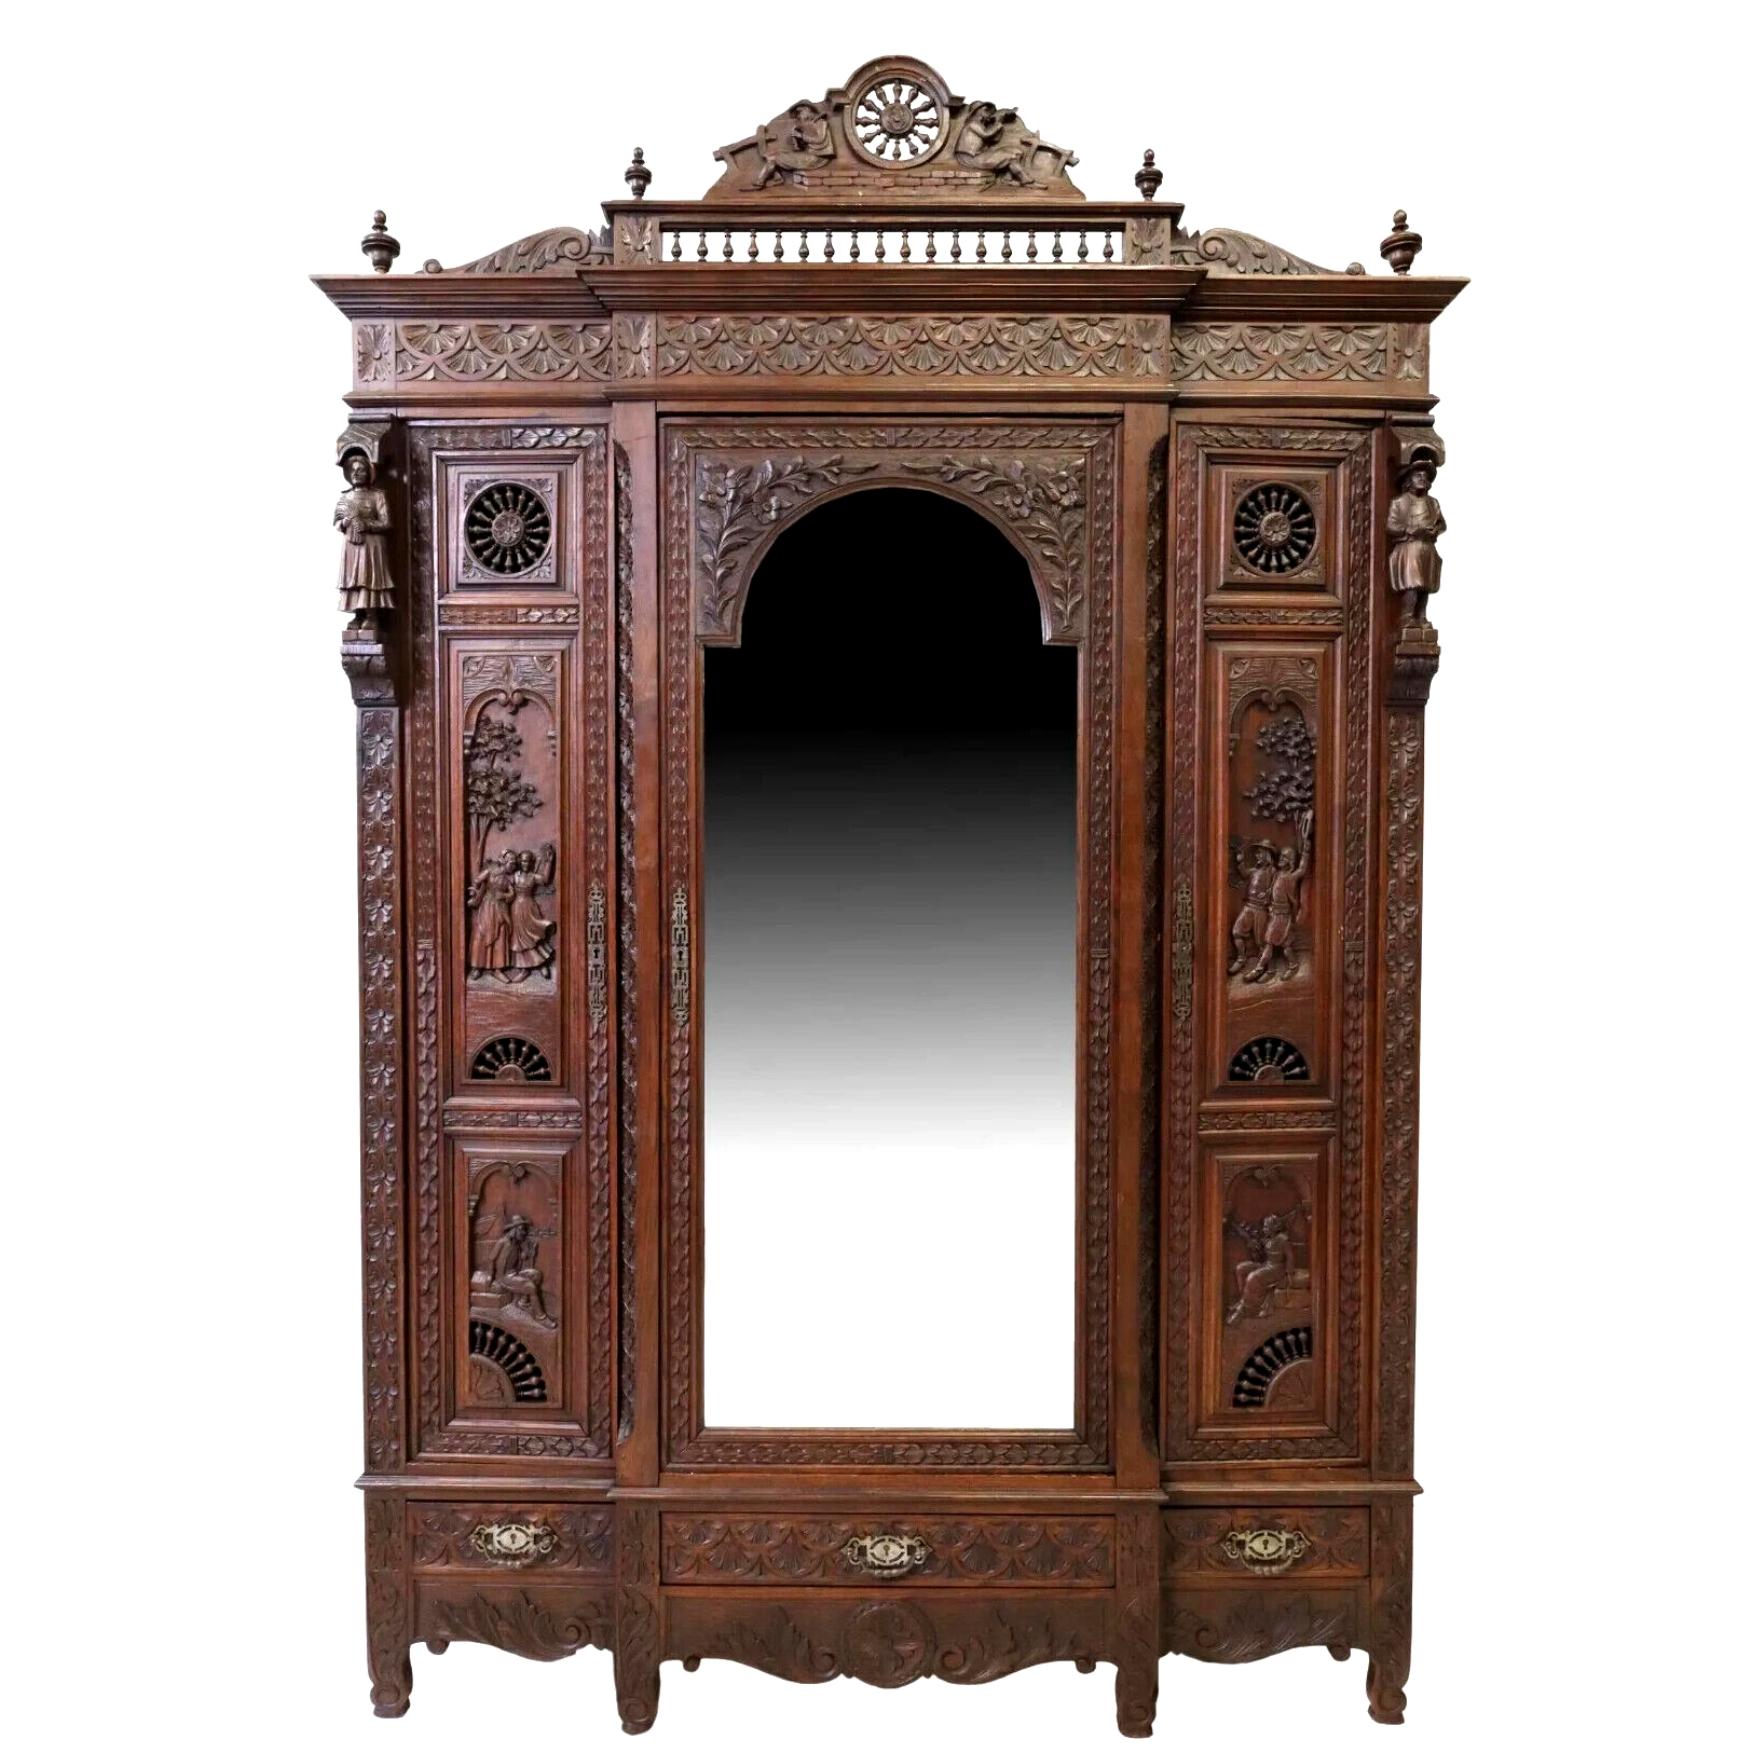 Gorgeous Antique Breakfront Armoire, Triple, French Breton, Carved Oak, Mirrored, Early 1900s, 20th century!

French carved oak breakfront armoire, Brittany, early 20th c., spindled wheel crest, figural carving, three doors, center door faced with